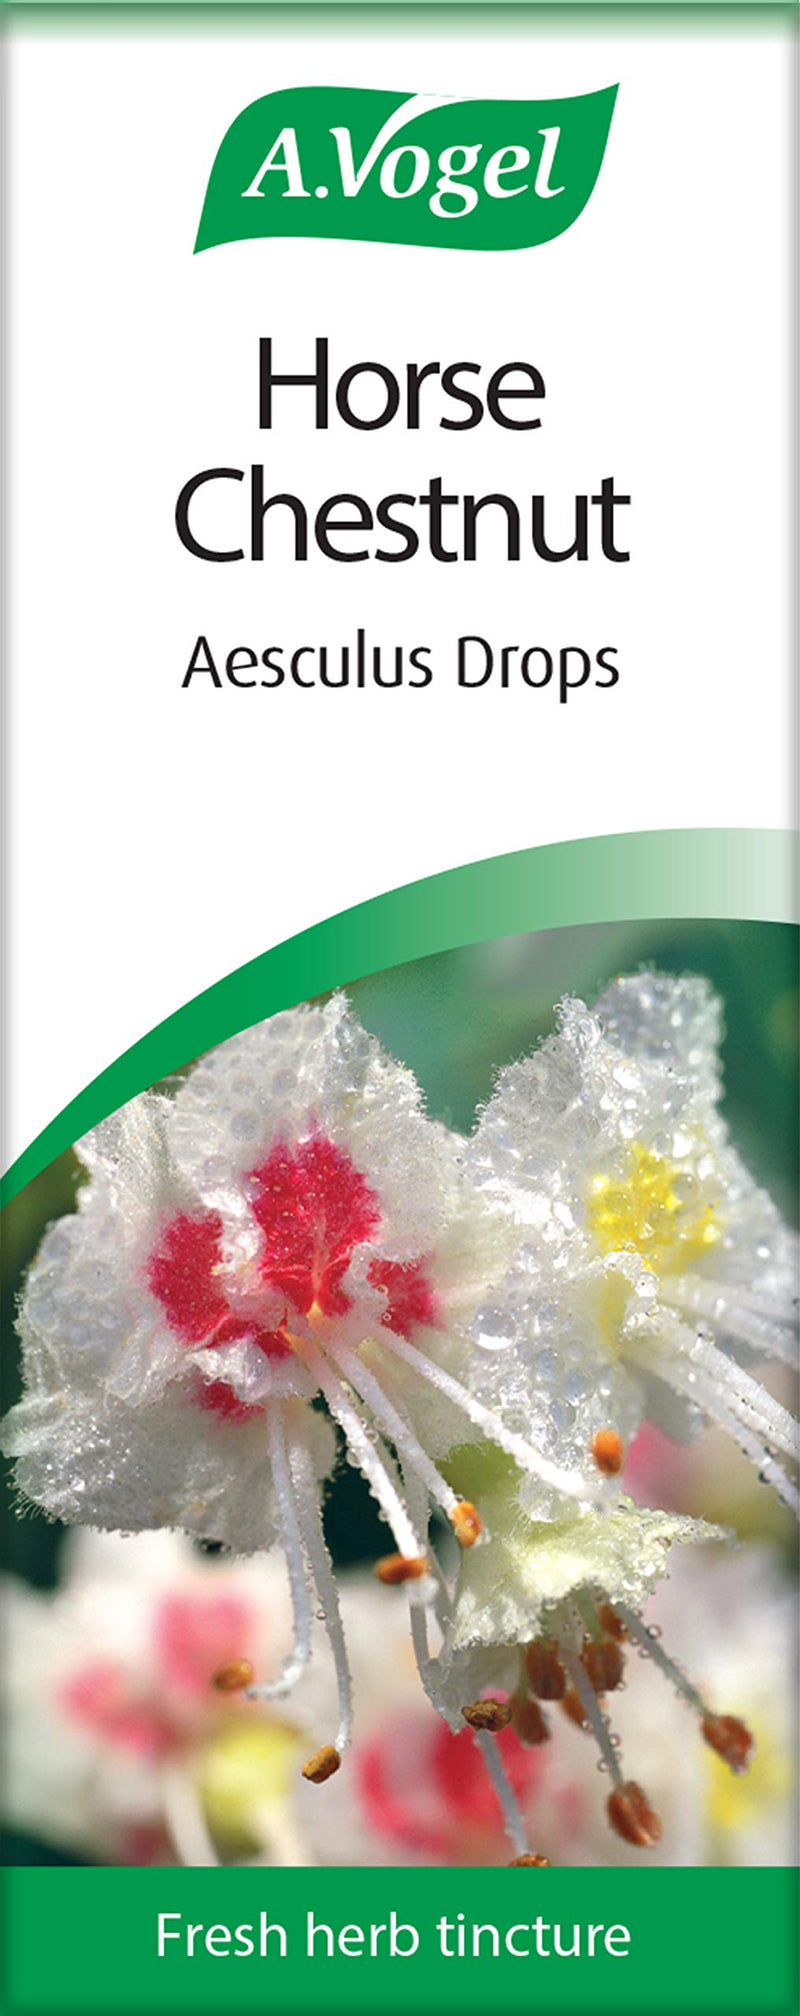 [Australia] - A.Vogel Horse Chestnut Aesculus Drops | Botanical Food Supplement | Extract of Fresh Aesculus Seeds | Suitable for Vegans | 50ml 